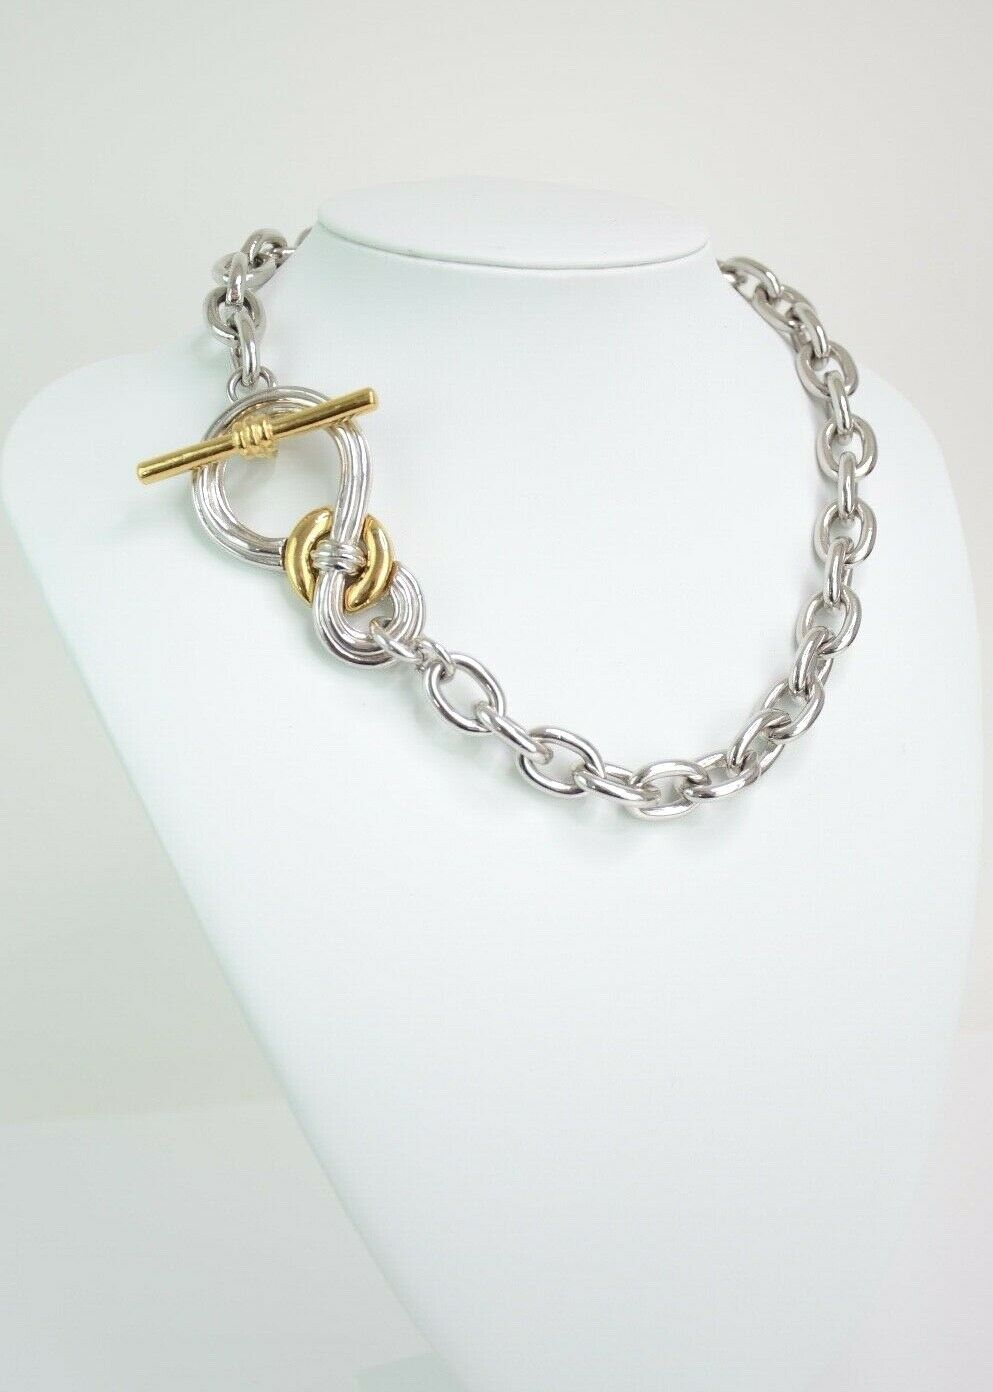 Givenchy Silver Tone Chain Necklace Vintage